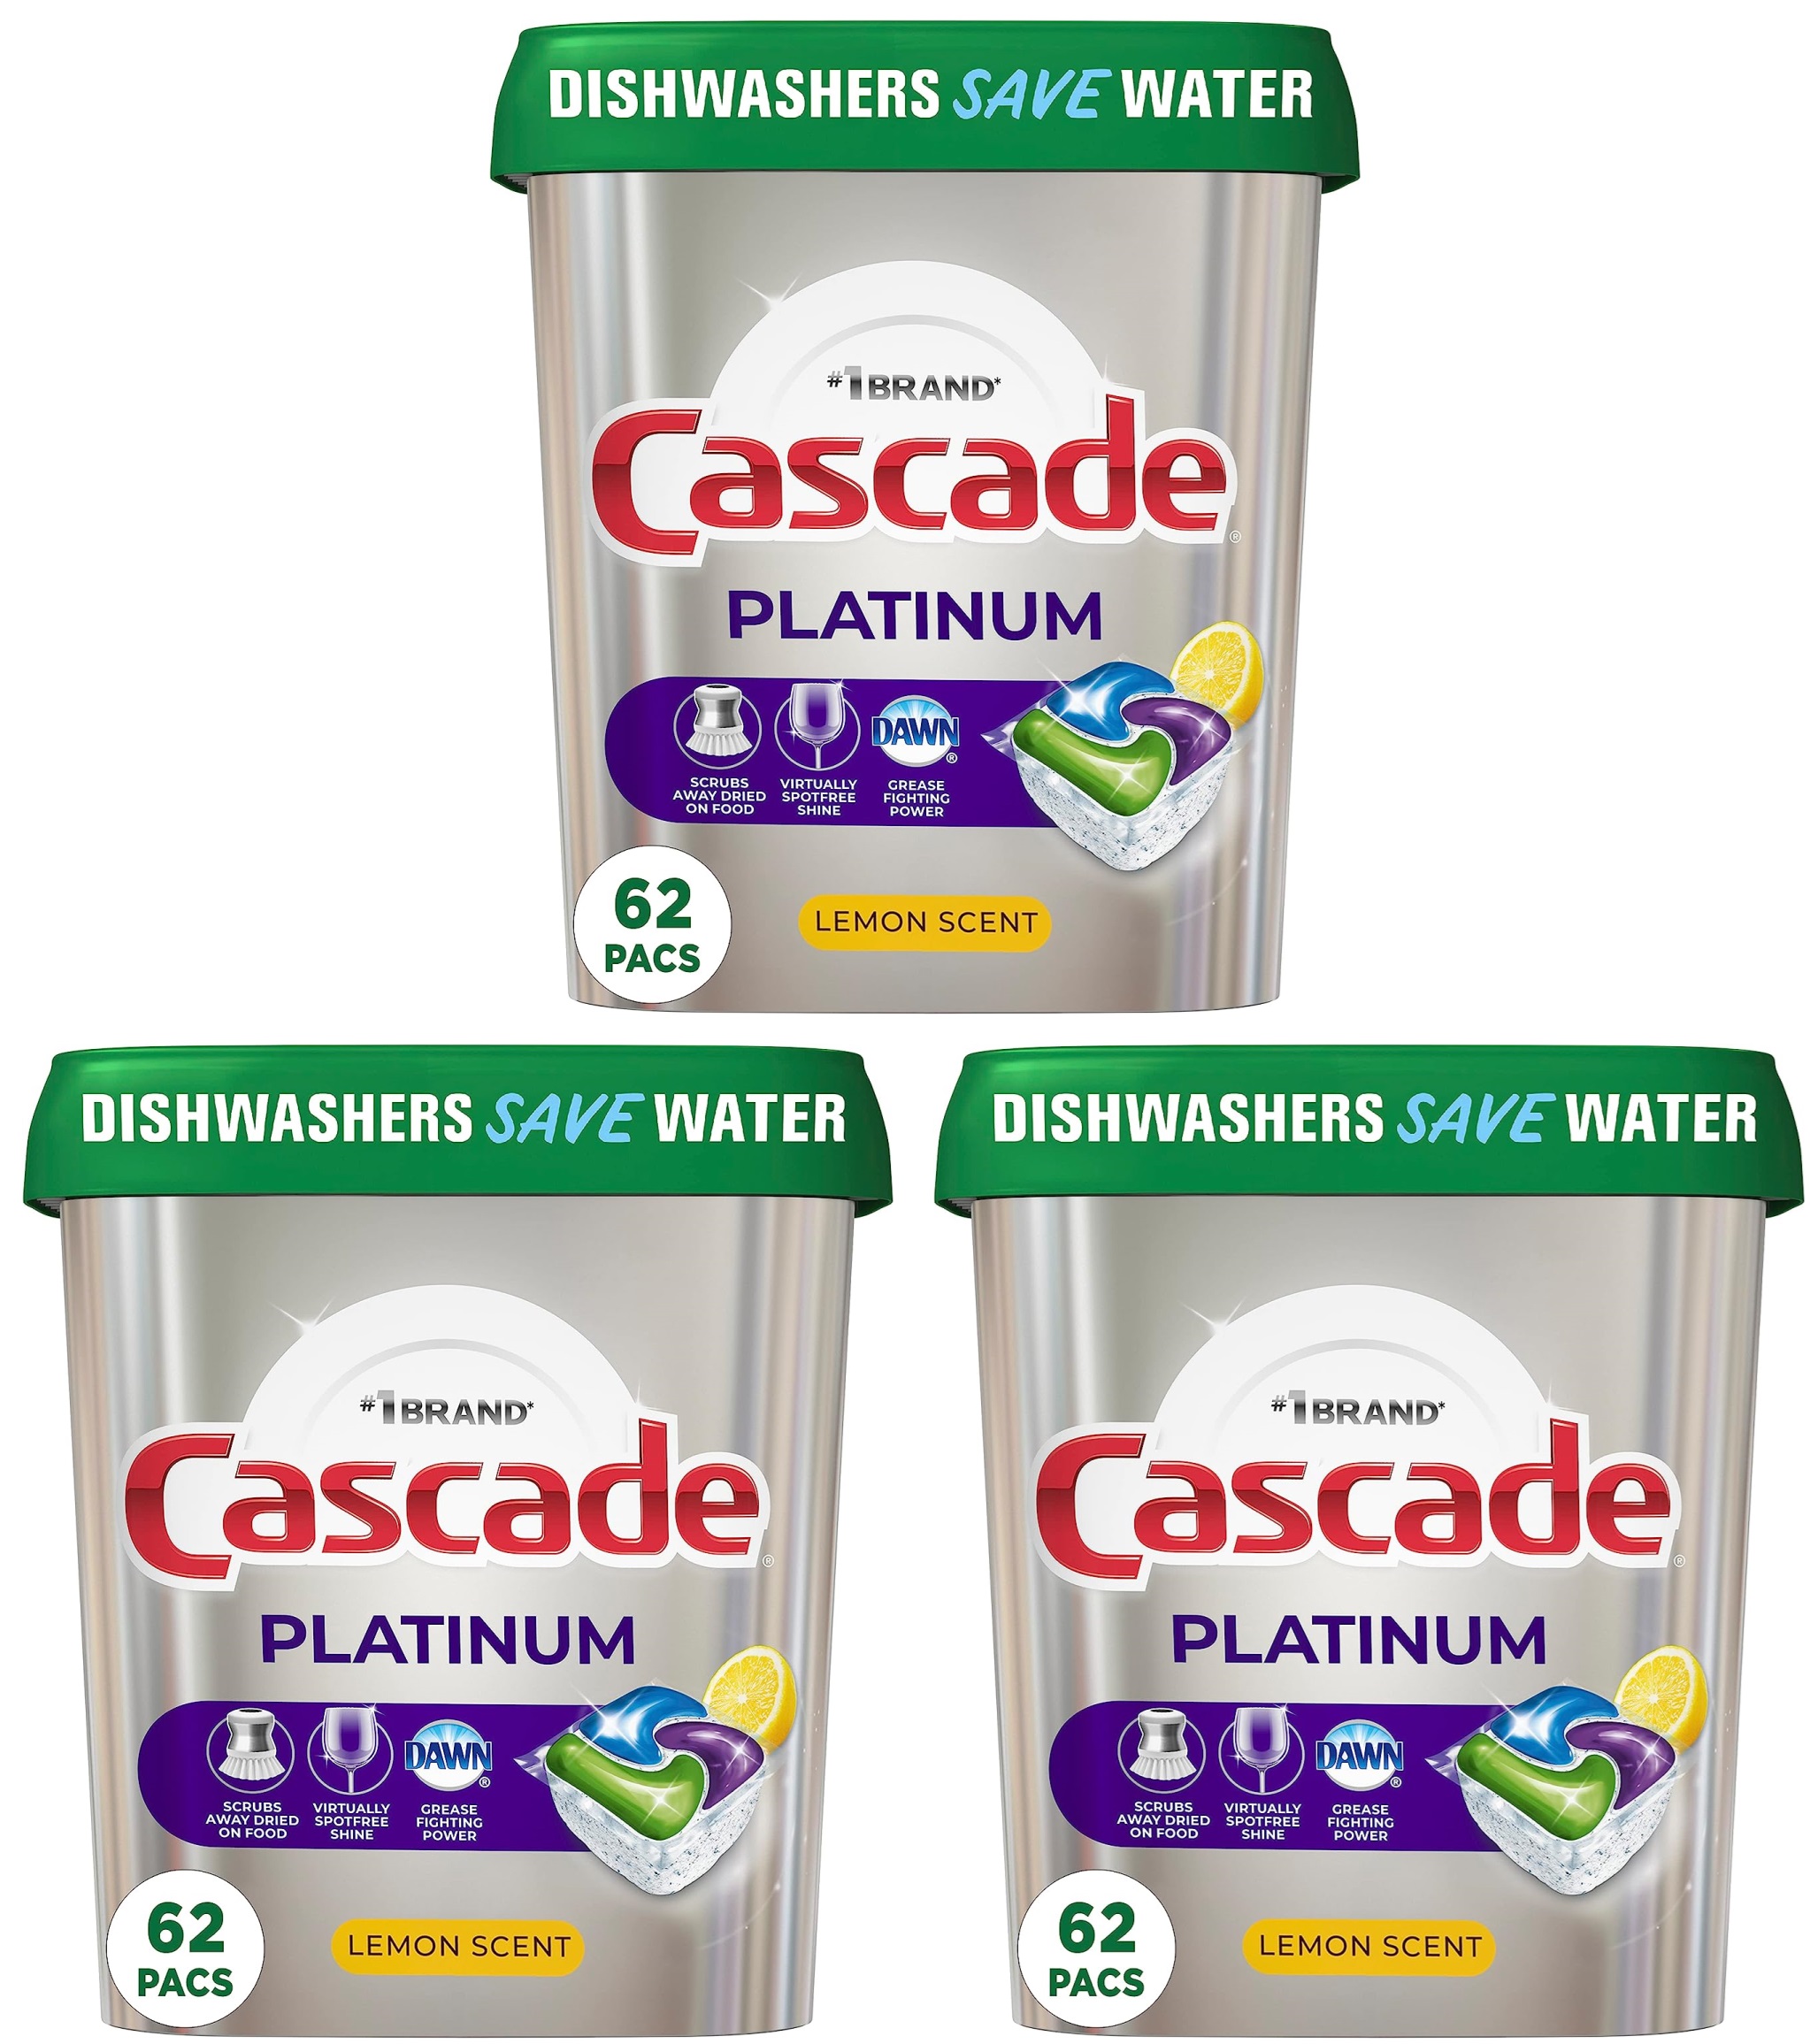 62-Ct Cascade Platinum Dishwasher Pods (Lemon) + $15 Amazon Credit 3 for $38.85 & More after $15 Rebate w/ S&S + Free S/H